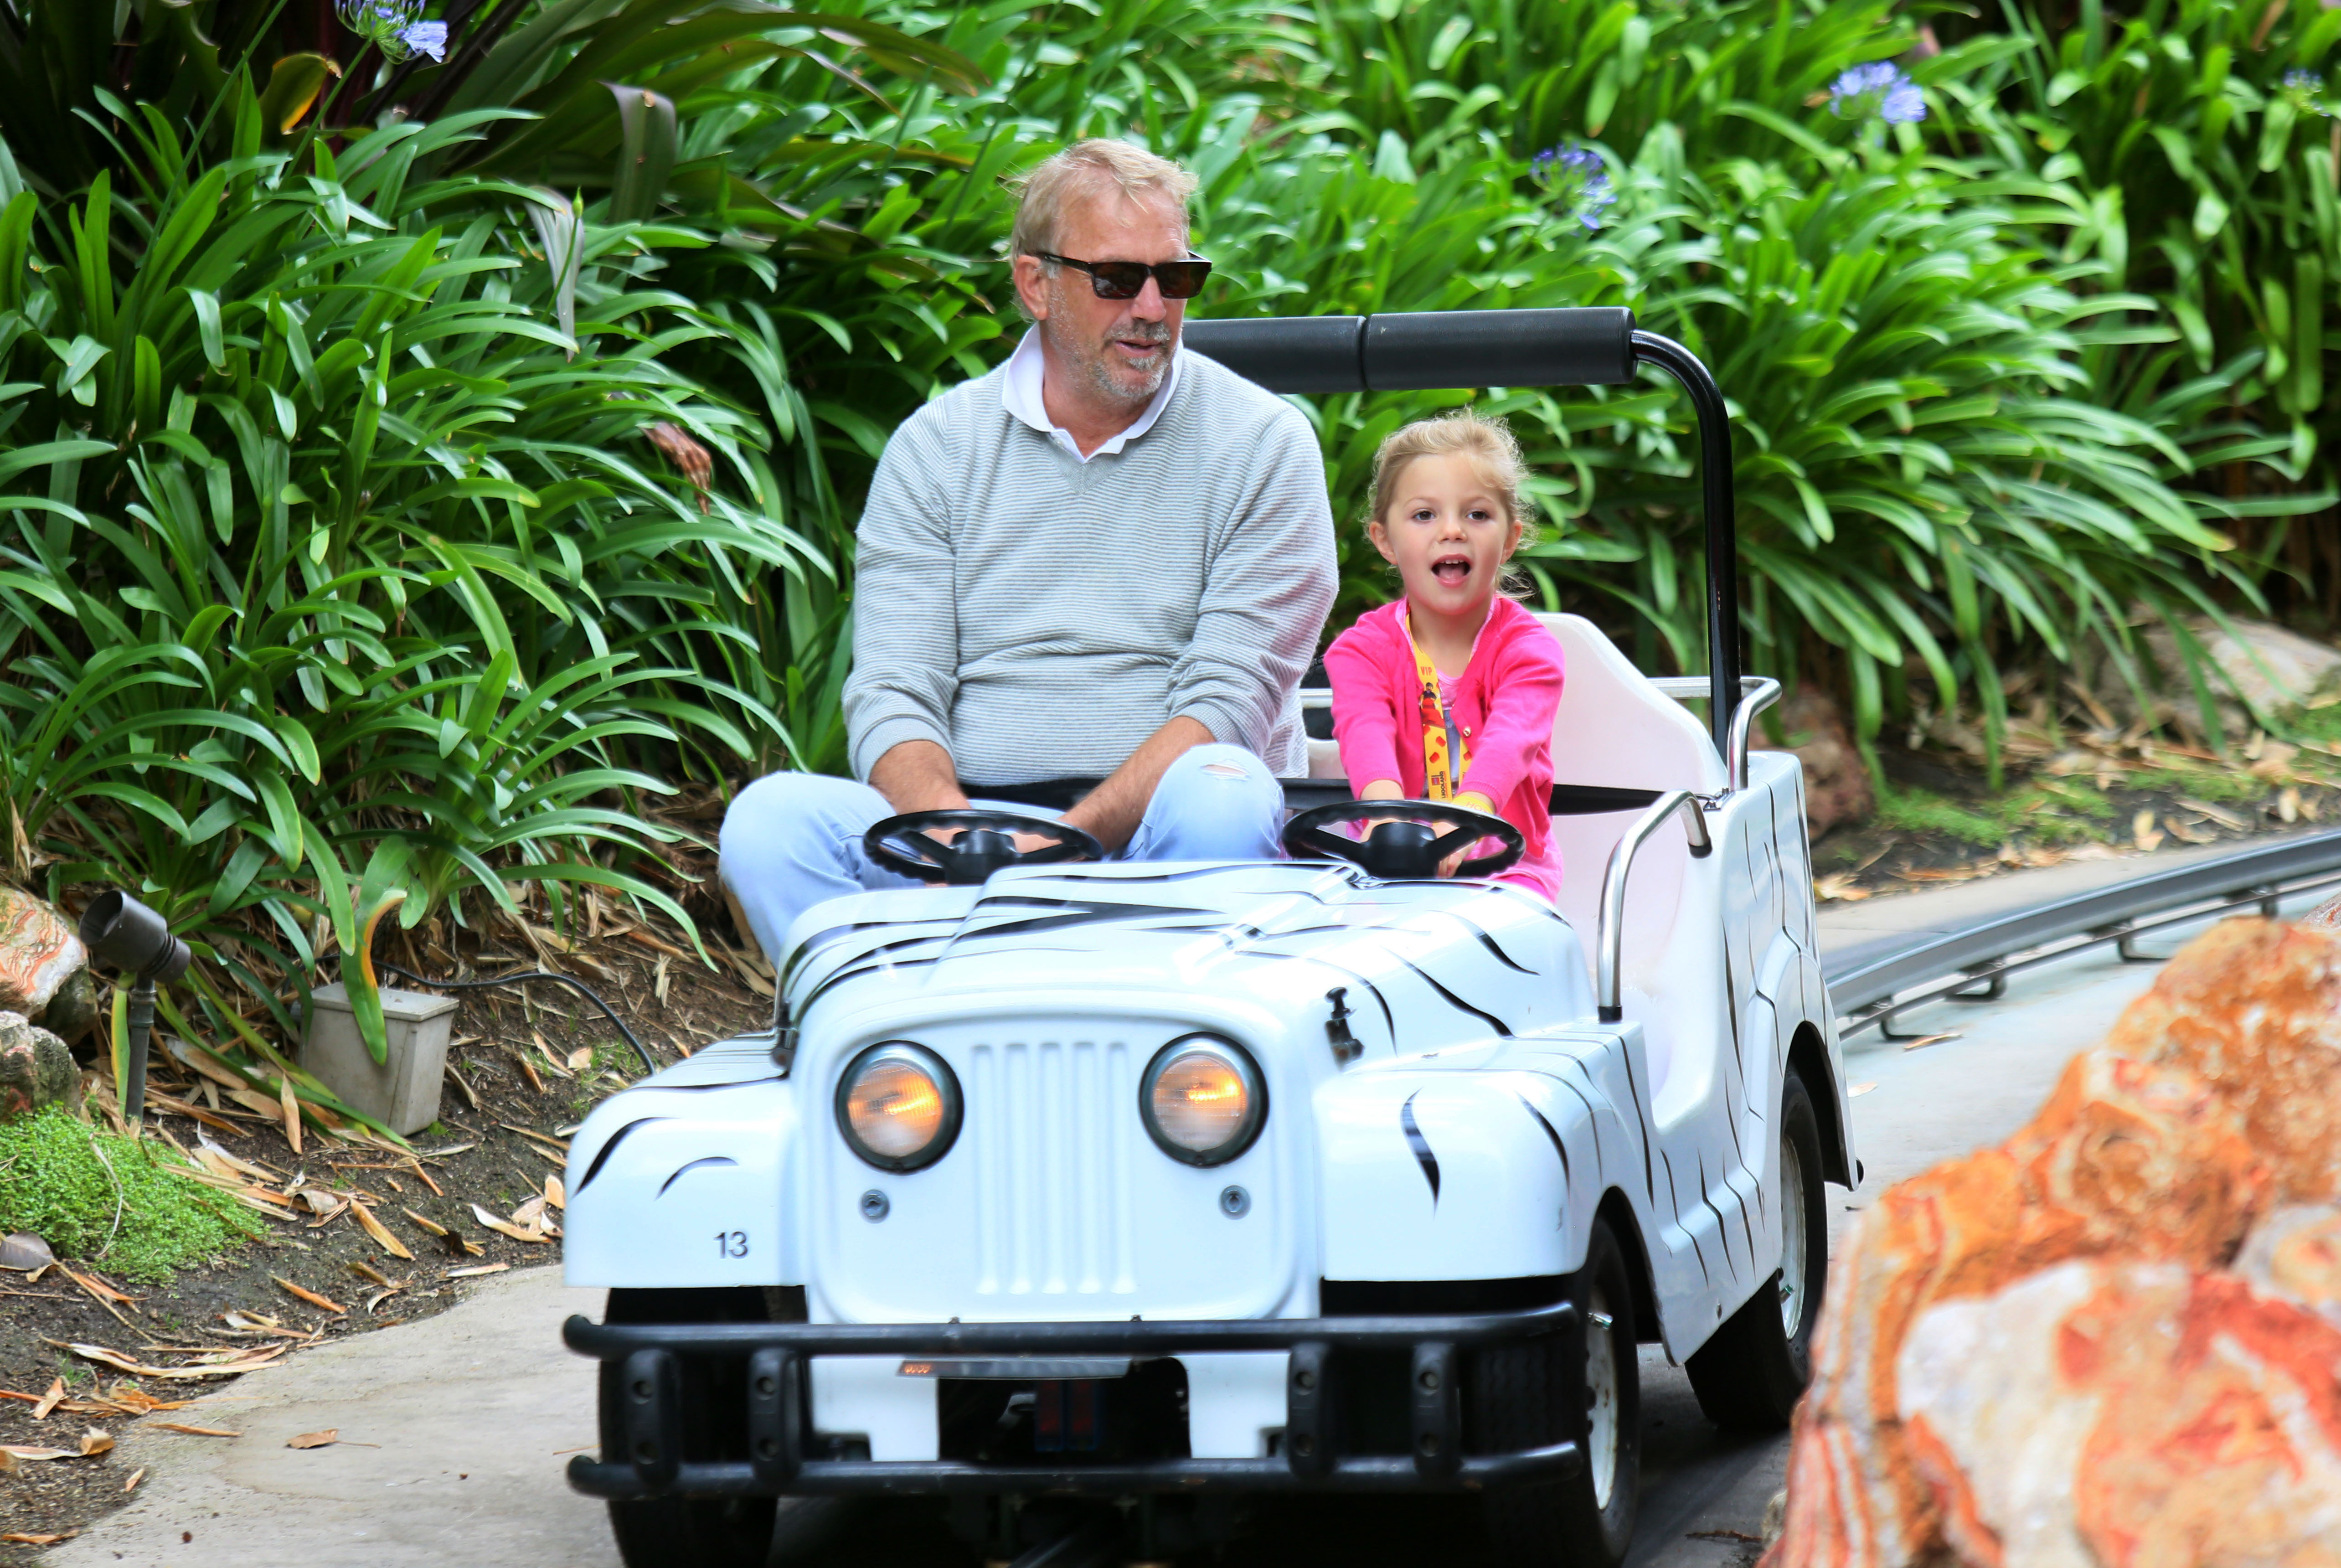 Kevin Costner on a ride with his daughter Grace at Legoland California on Wednesday, May 27, 2015 in Carlsbad, California | Source: Getty Images